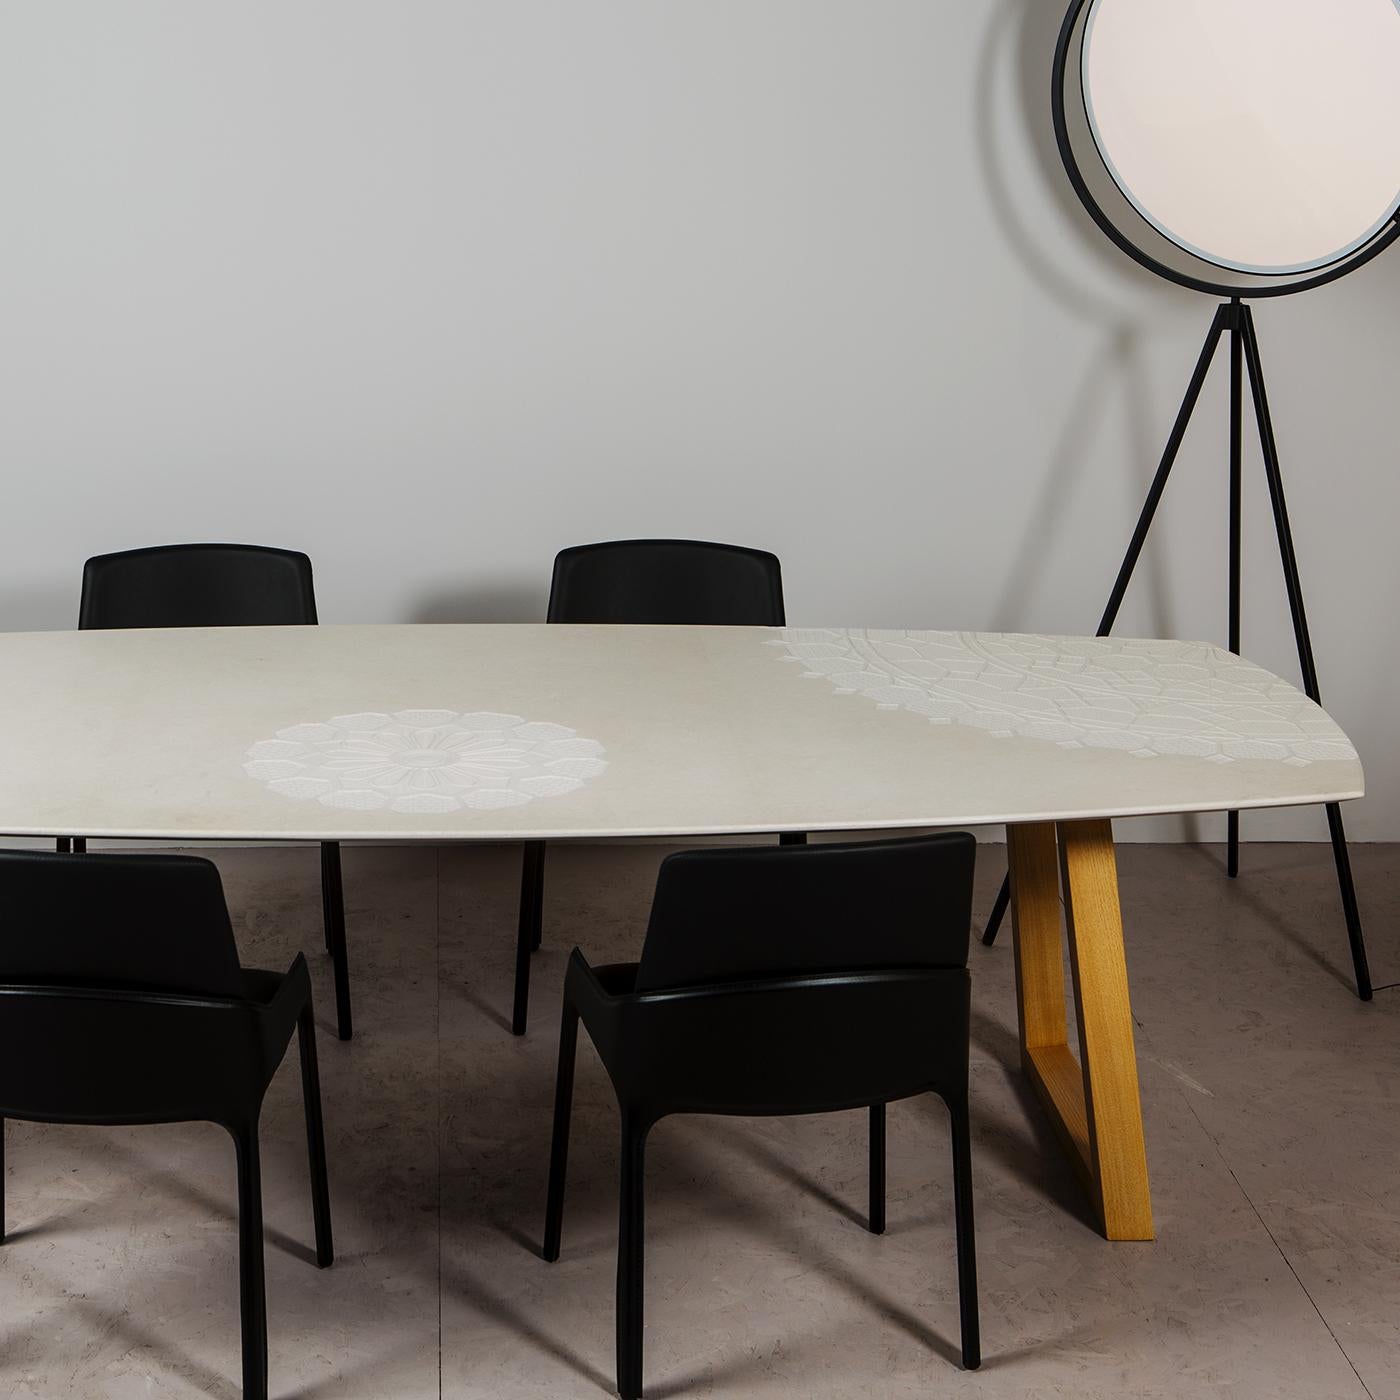 This modern and striking dining table is made of Crema Tunisi stone. The top displays an exquisitely sculpted surface, showcasing superb doilies and coverings. The linear and elegant base structure is made of natural-finished wood. This